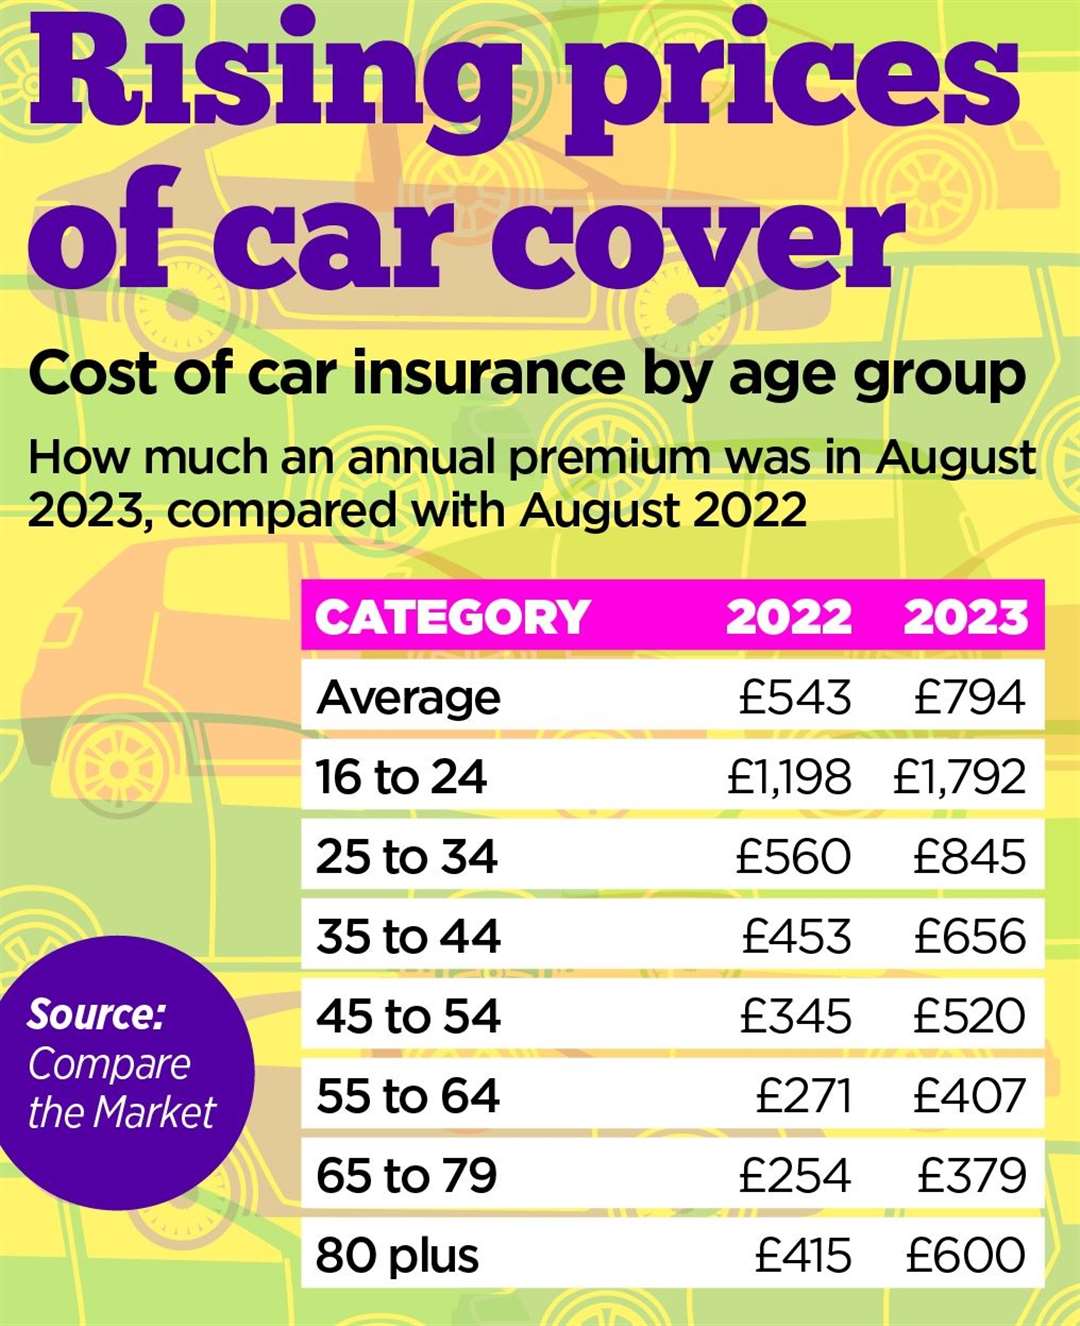 Car insurance premiums are rising in price